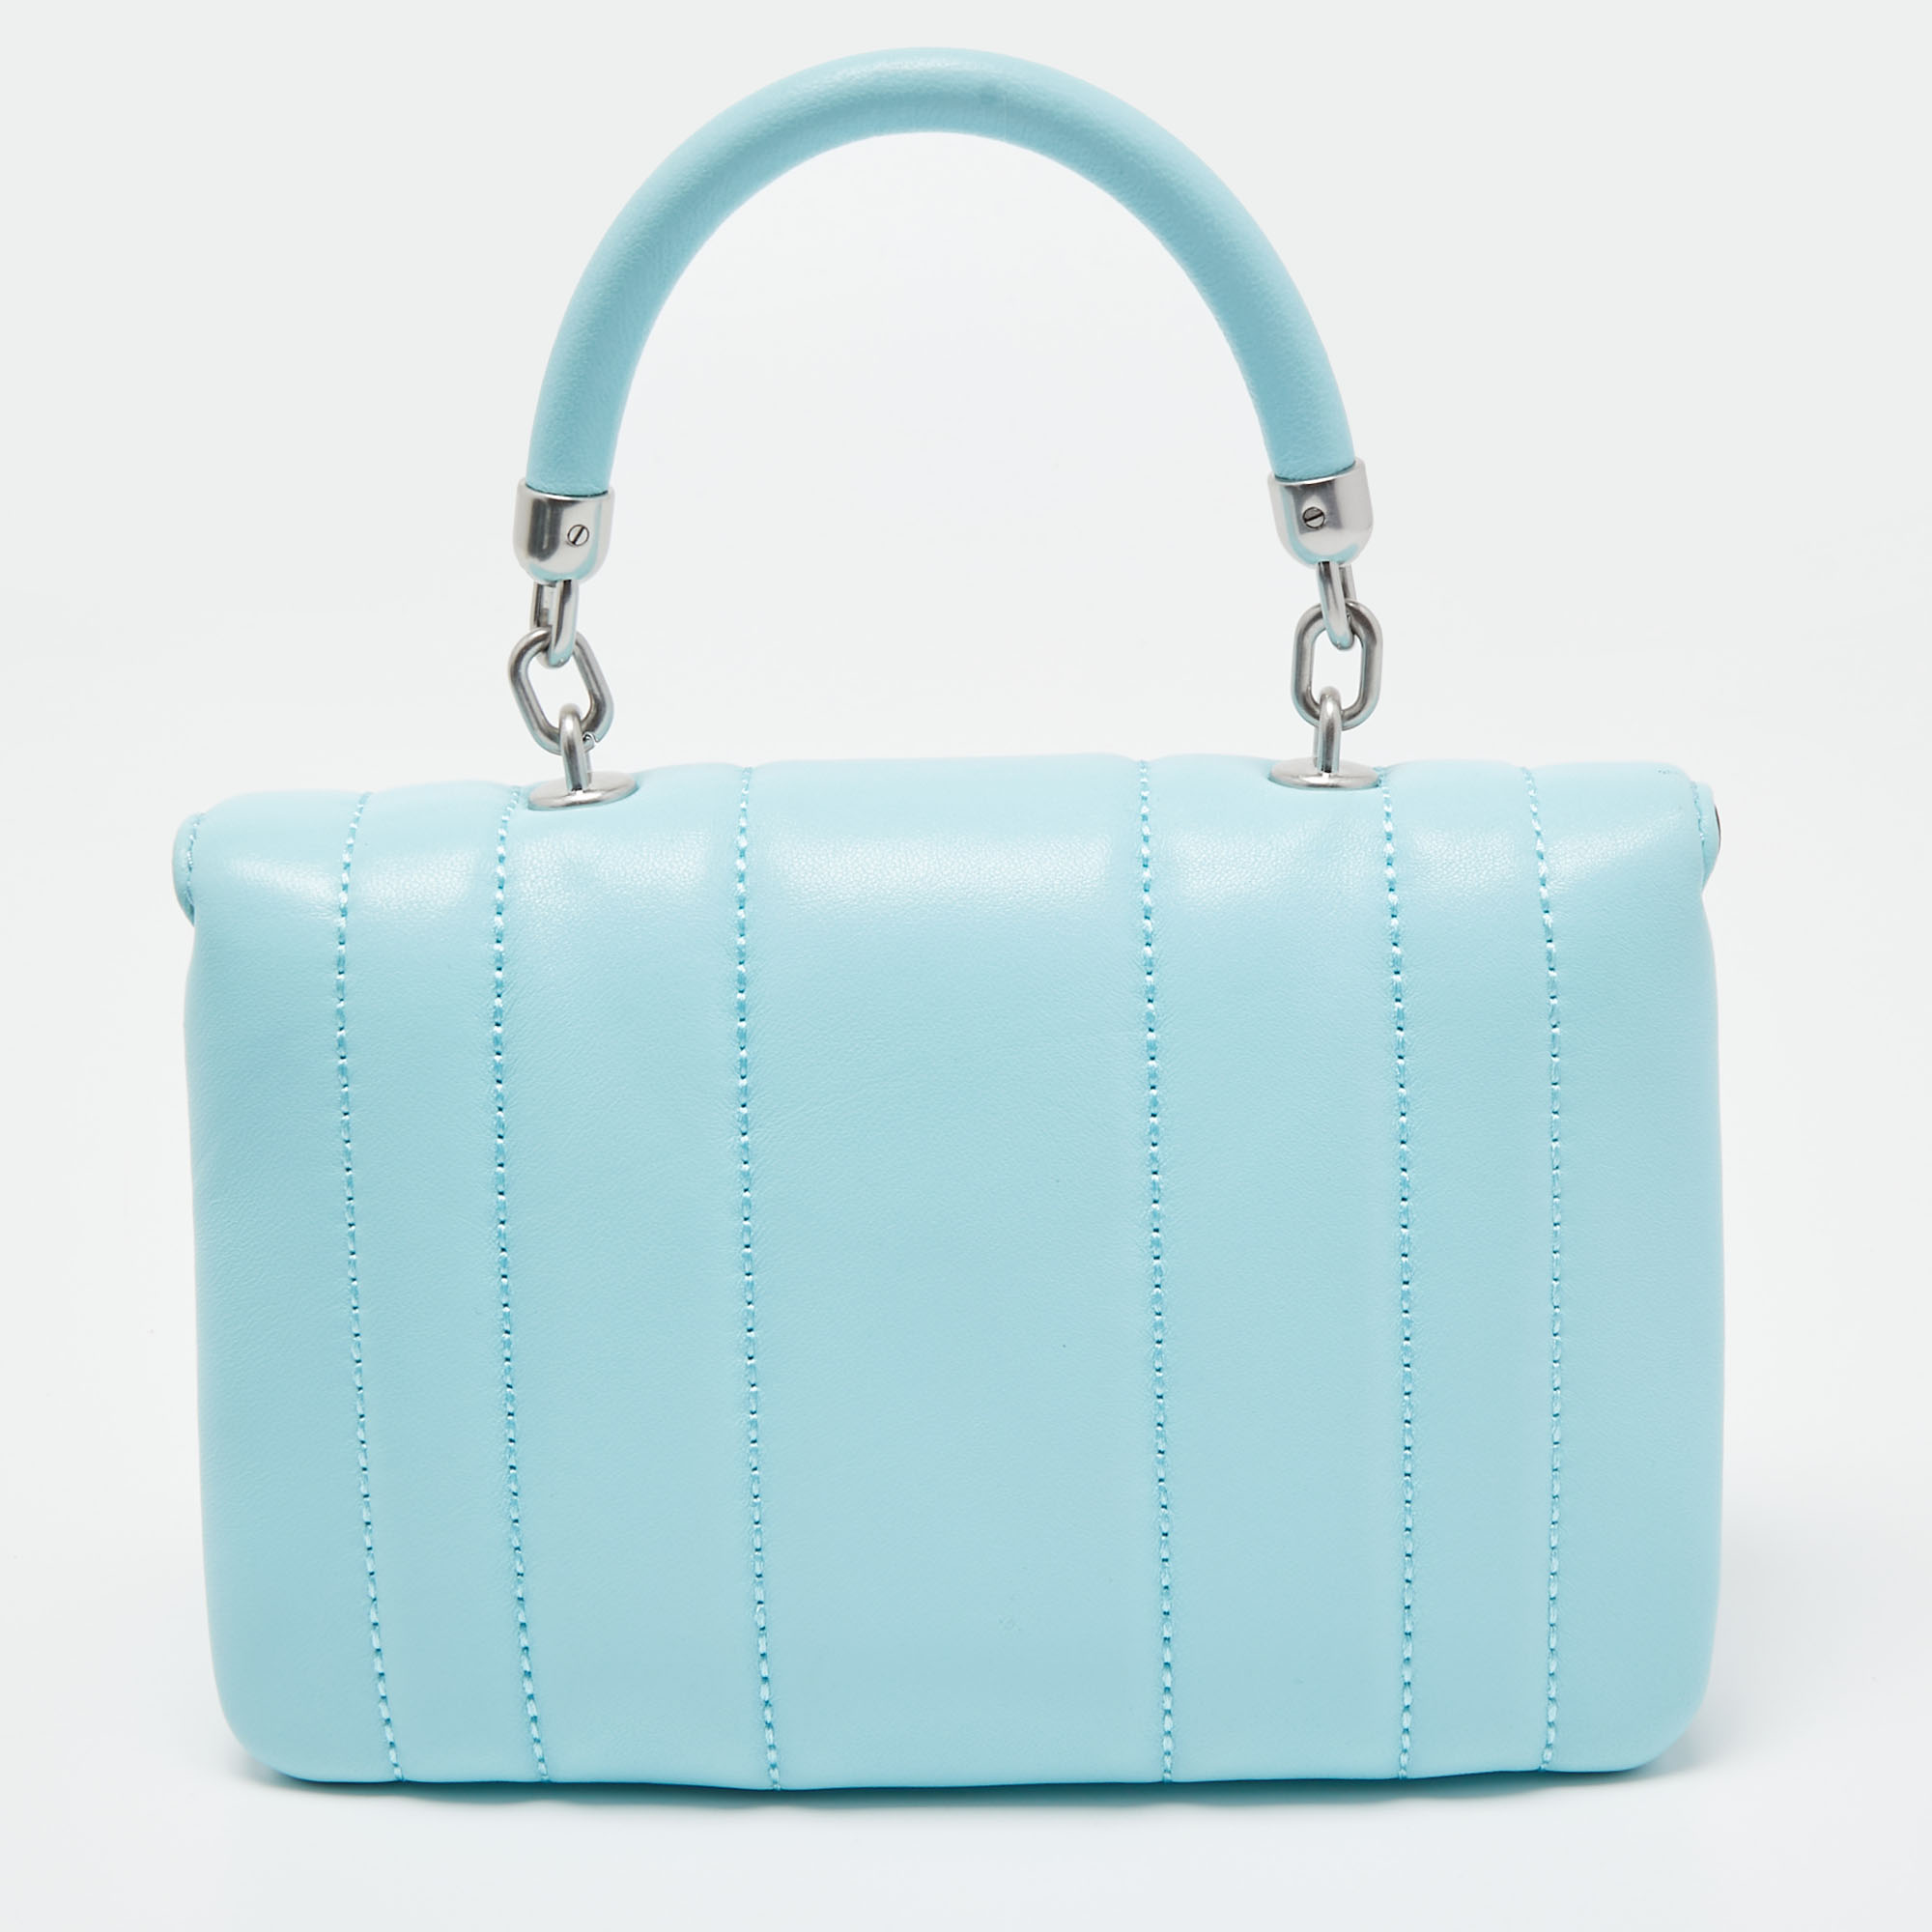 Tory Burch Light Blue Quilted Leather Kira Top Handle Bag